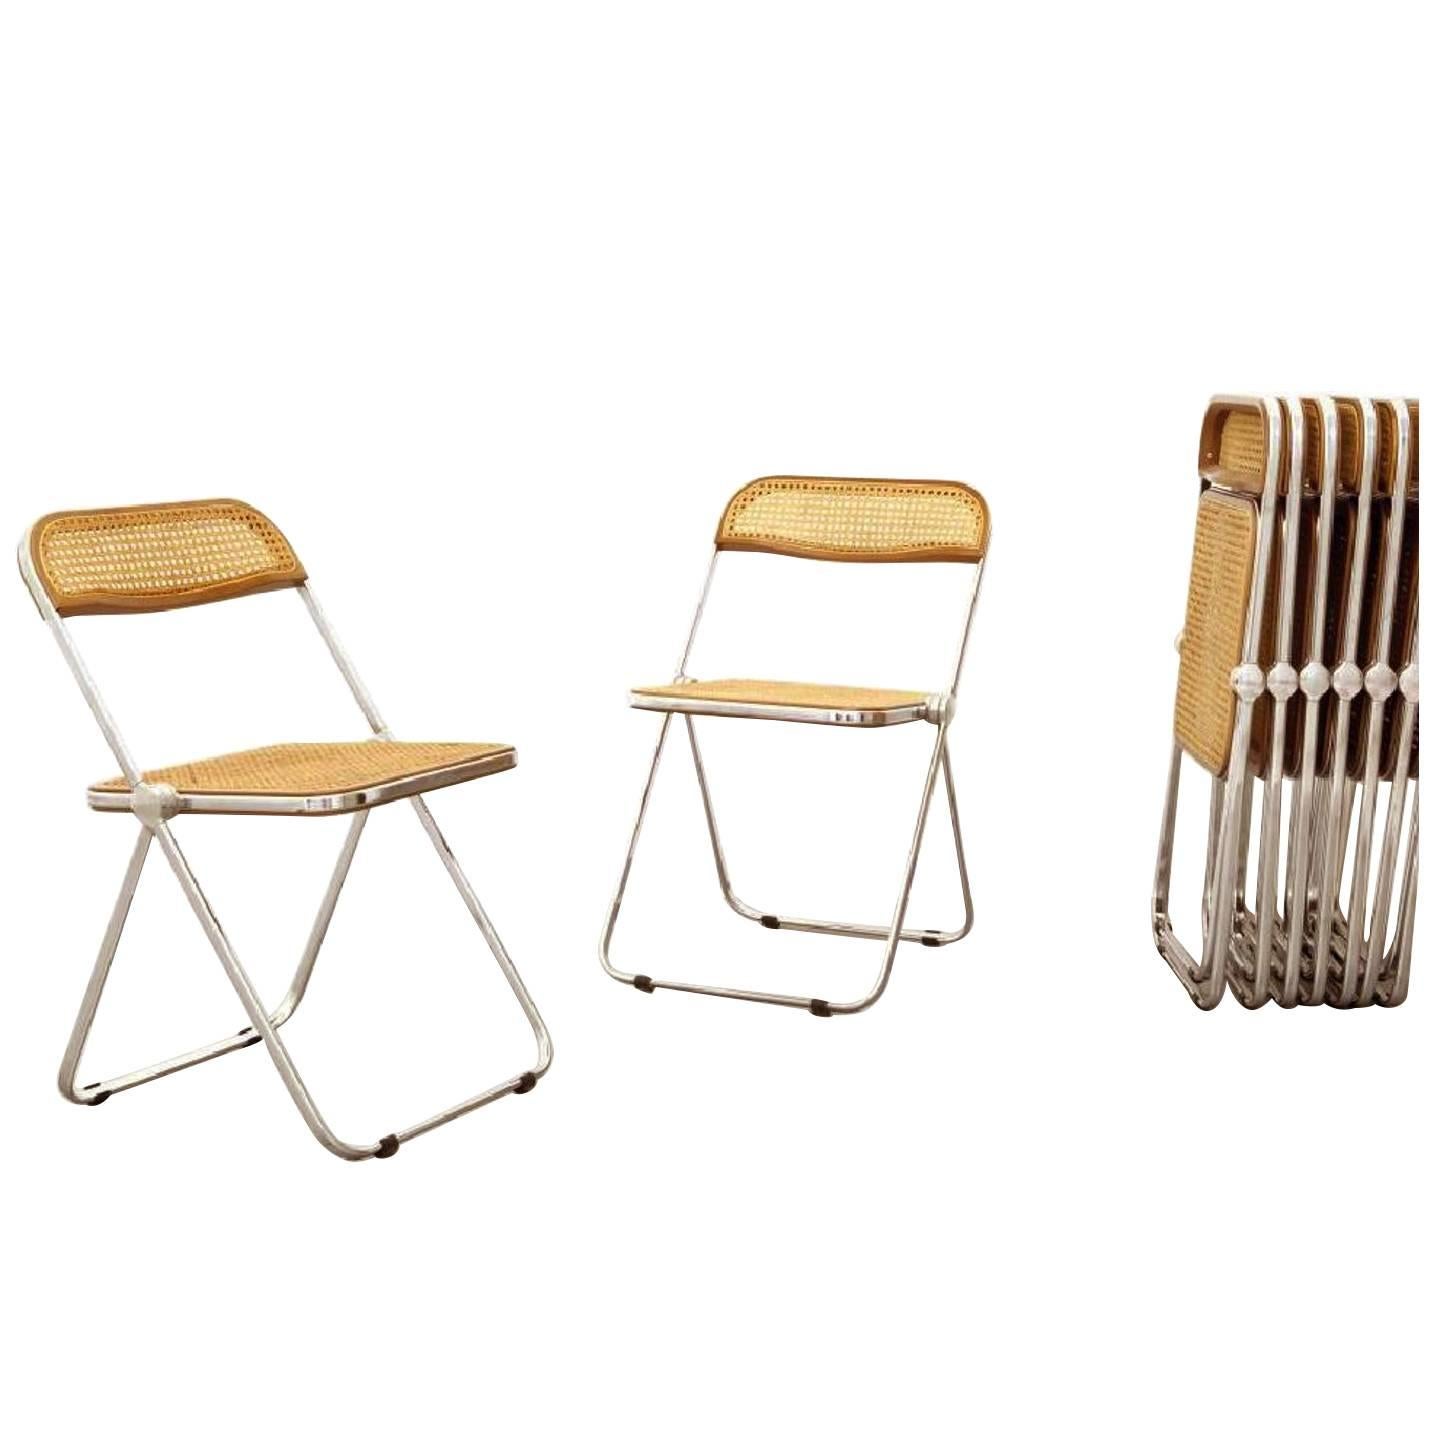 Giancarlo Piretti, Rare Set of Ten Wood and Caning 'Plia' Folding Chairs For Sale